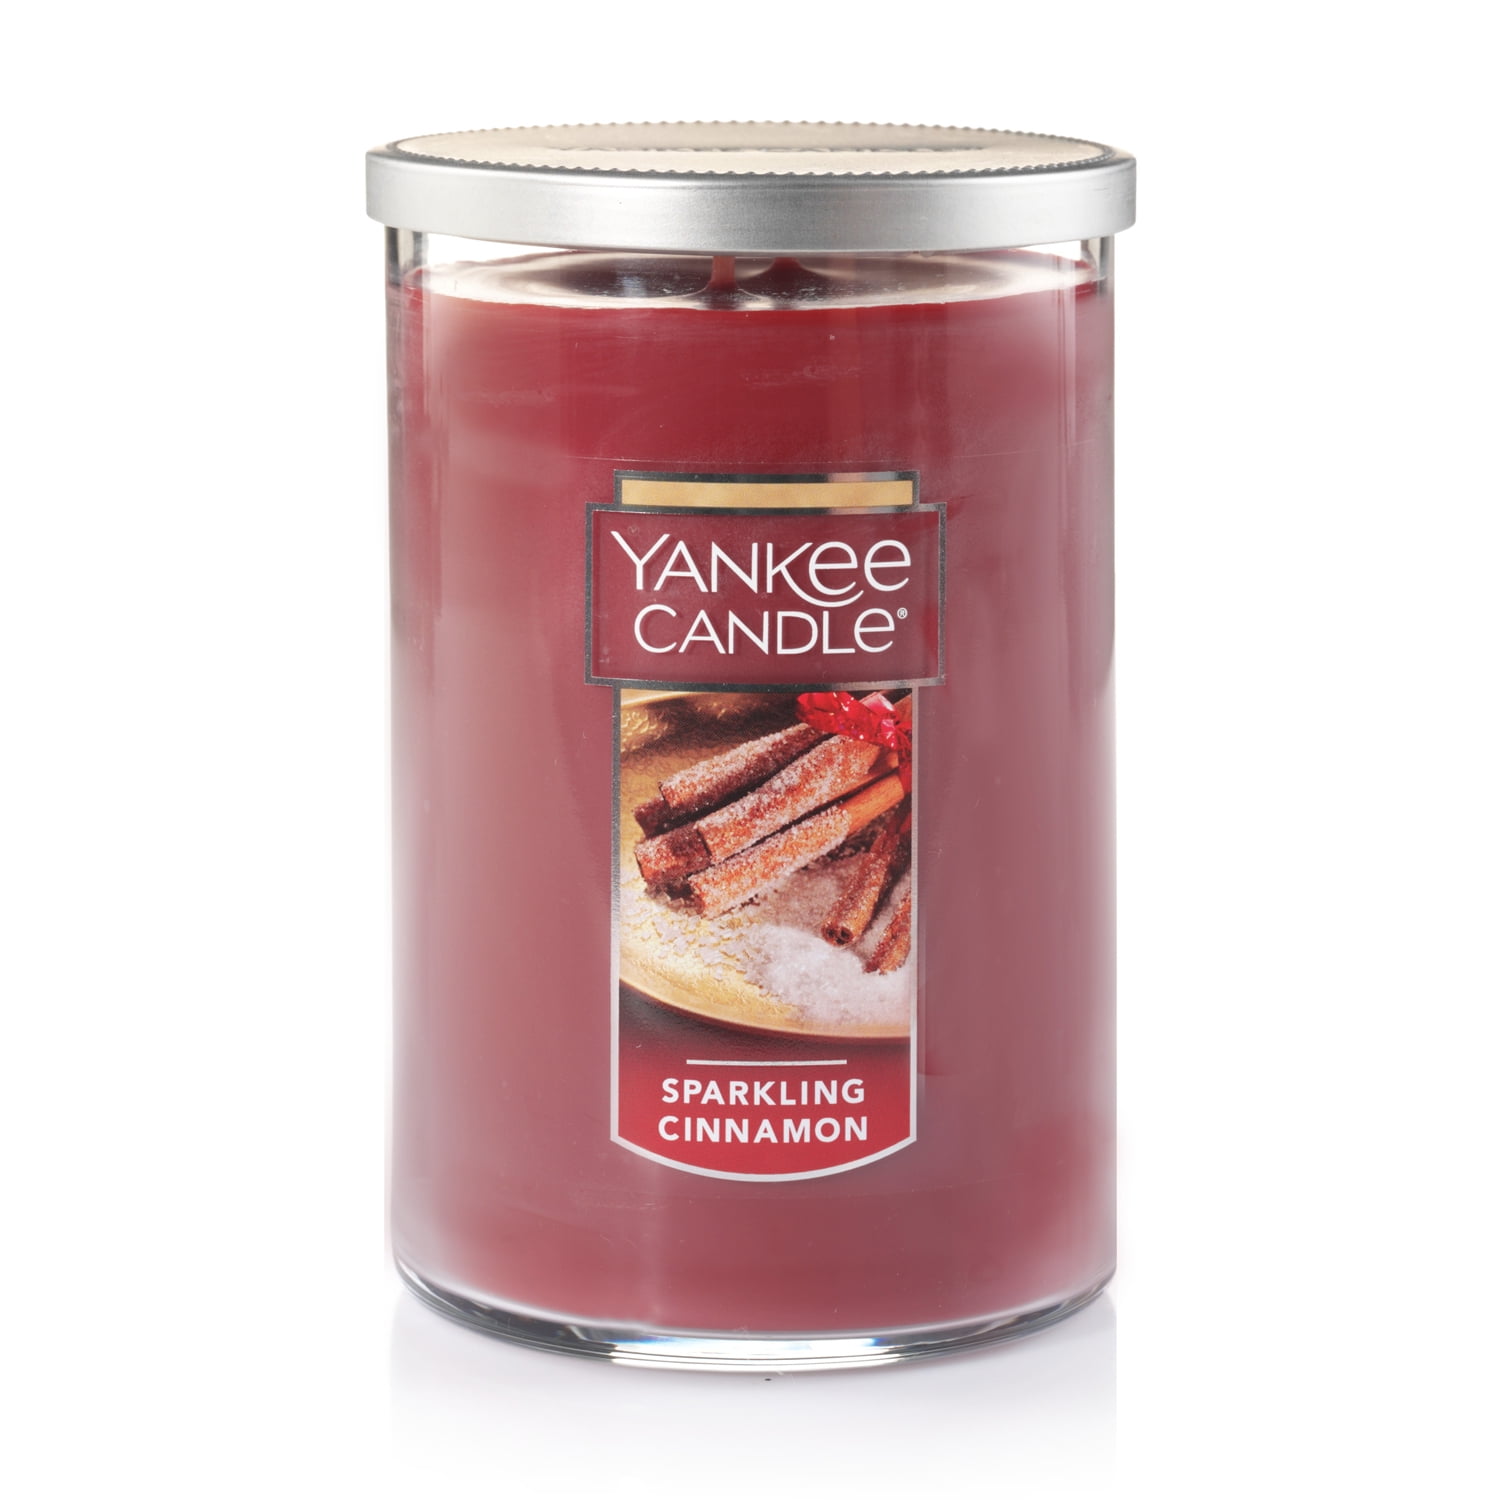 Large 2-Wick Tumbler Candle C Yankee Candle Original Large Jar Scented Candle 